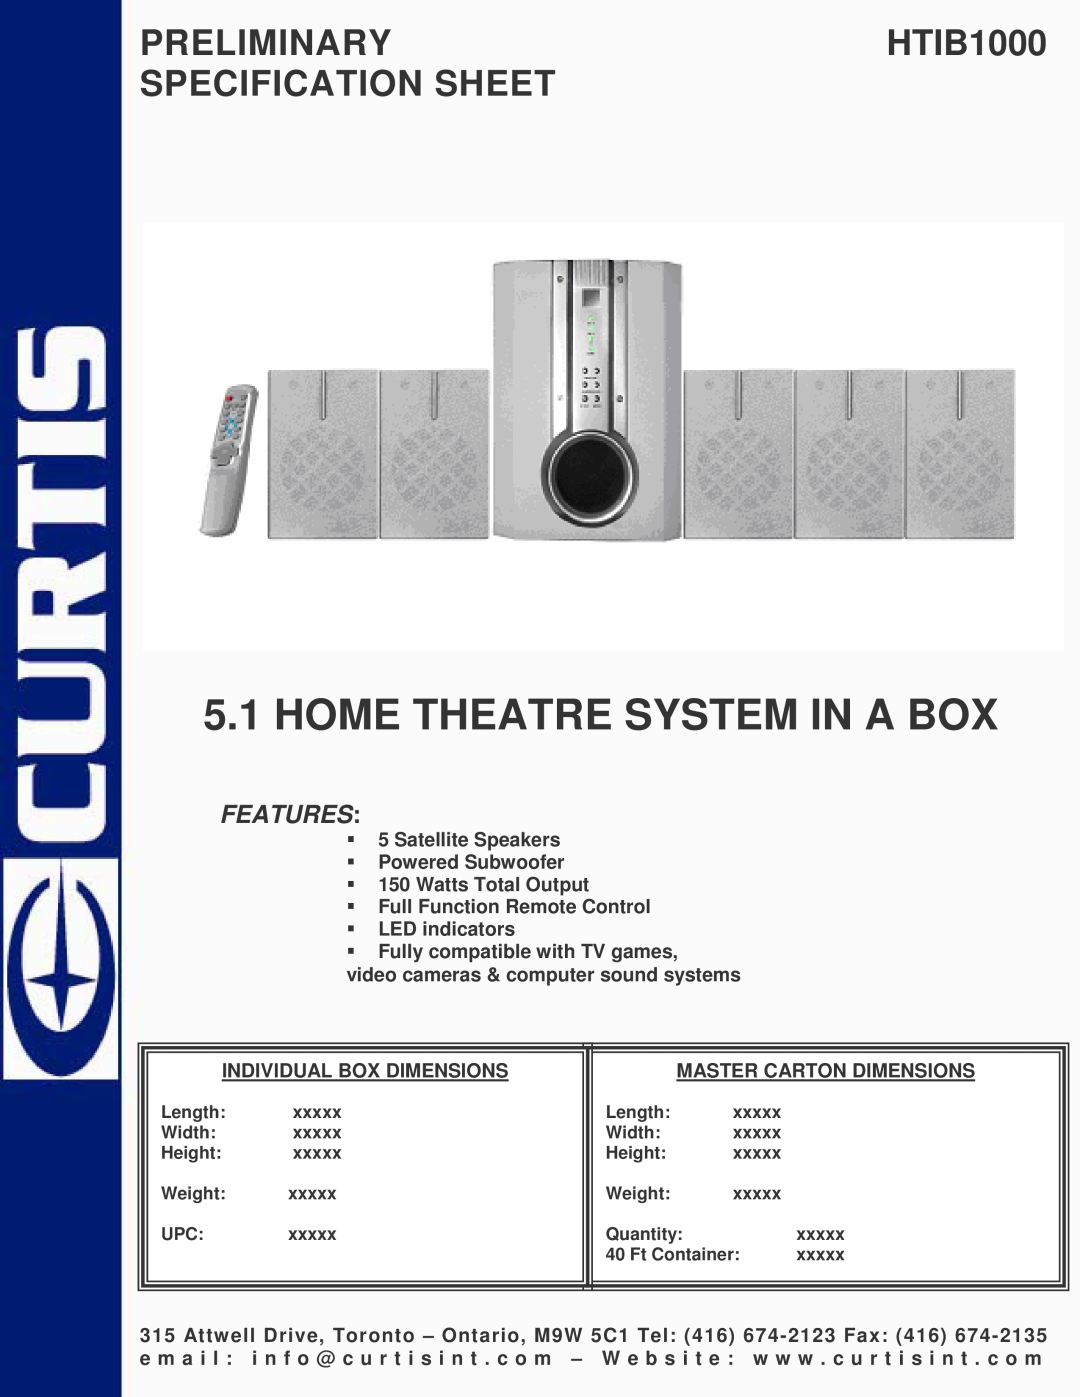 Curtis specifications Home Theatre System In A Box, PRELIMINARYHTIB1000 SPECIFICATION SHEET, Features 